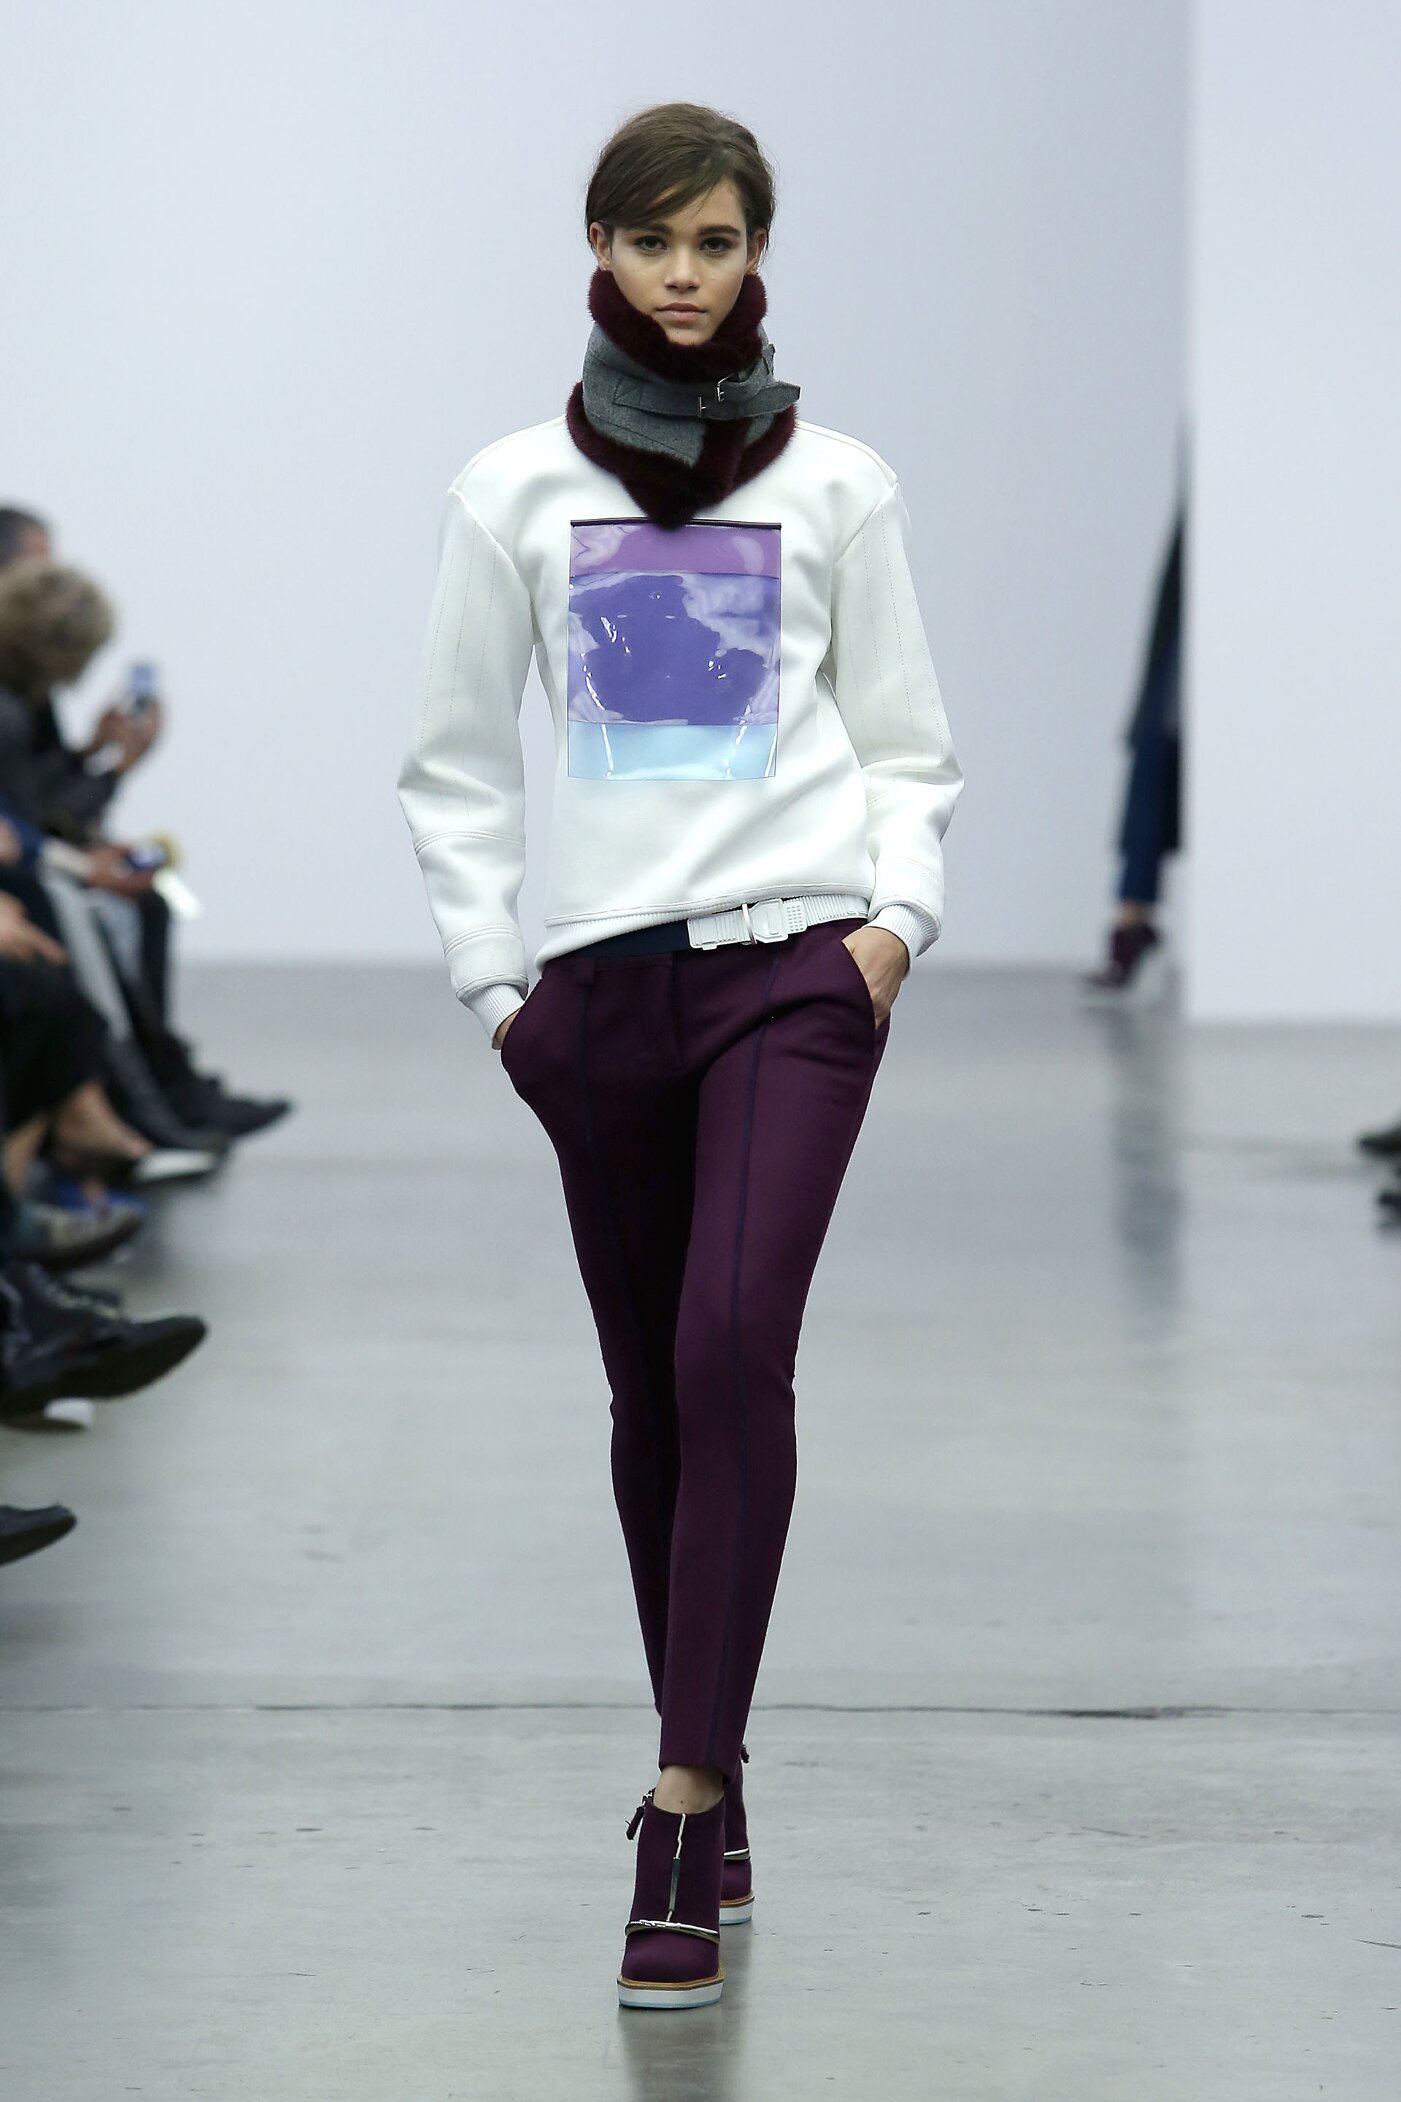 ICEBERG FALL WINTER 2014-15 WOMEN’S COLLECTION | The Skinny Beep